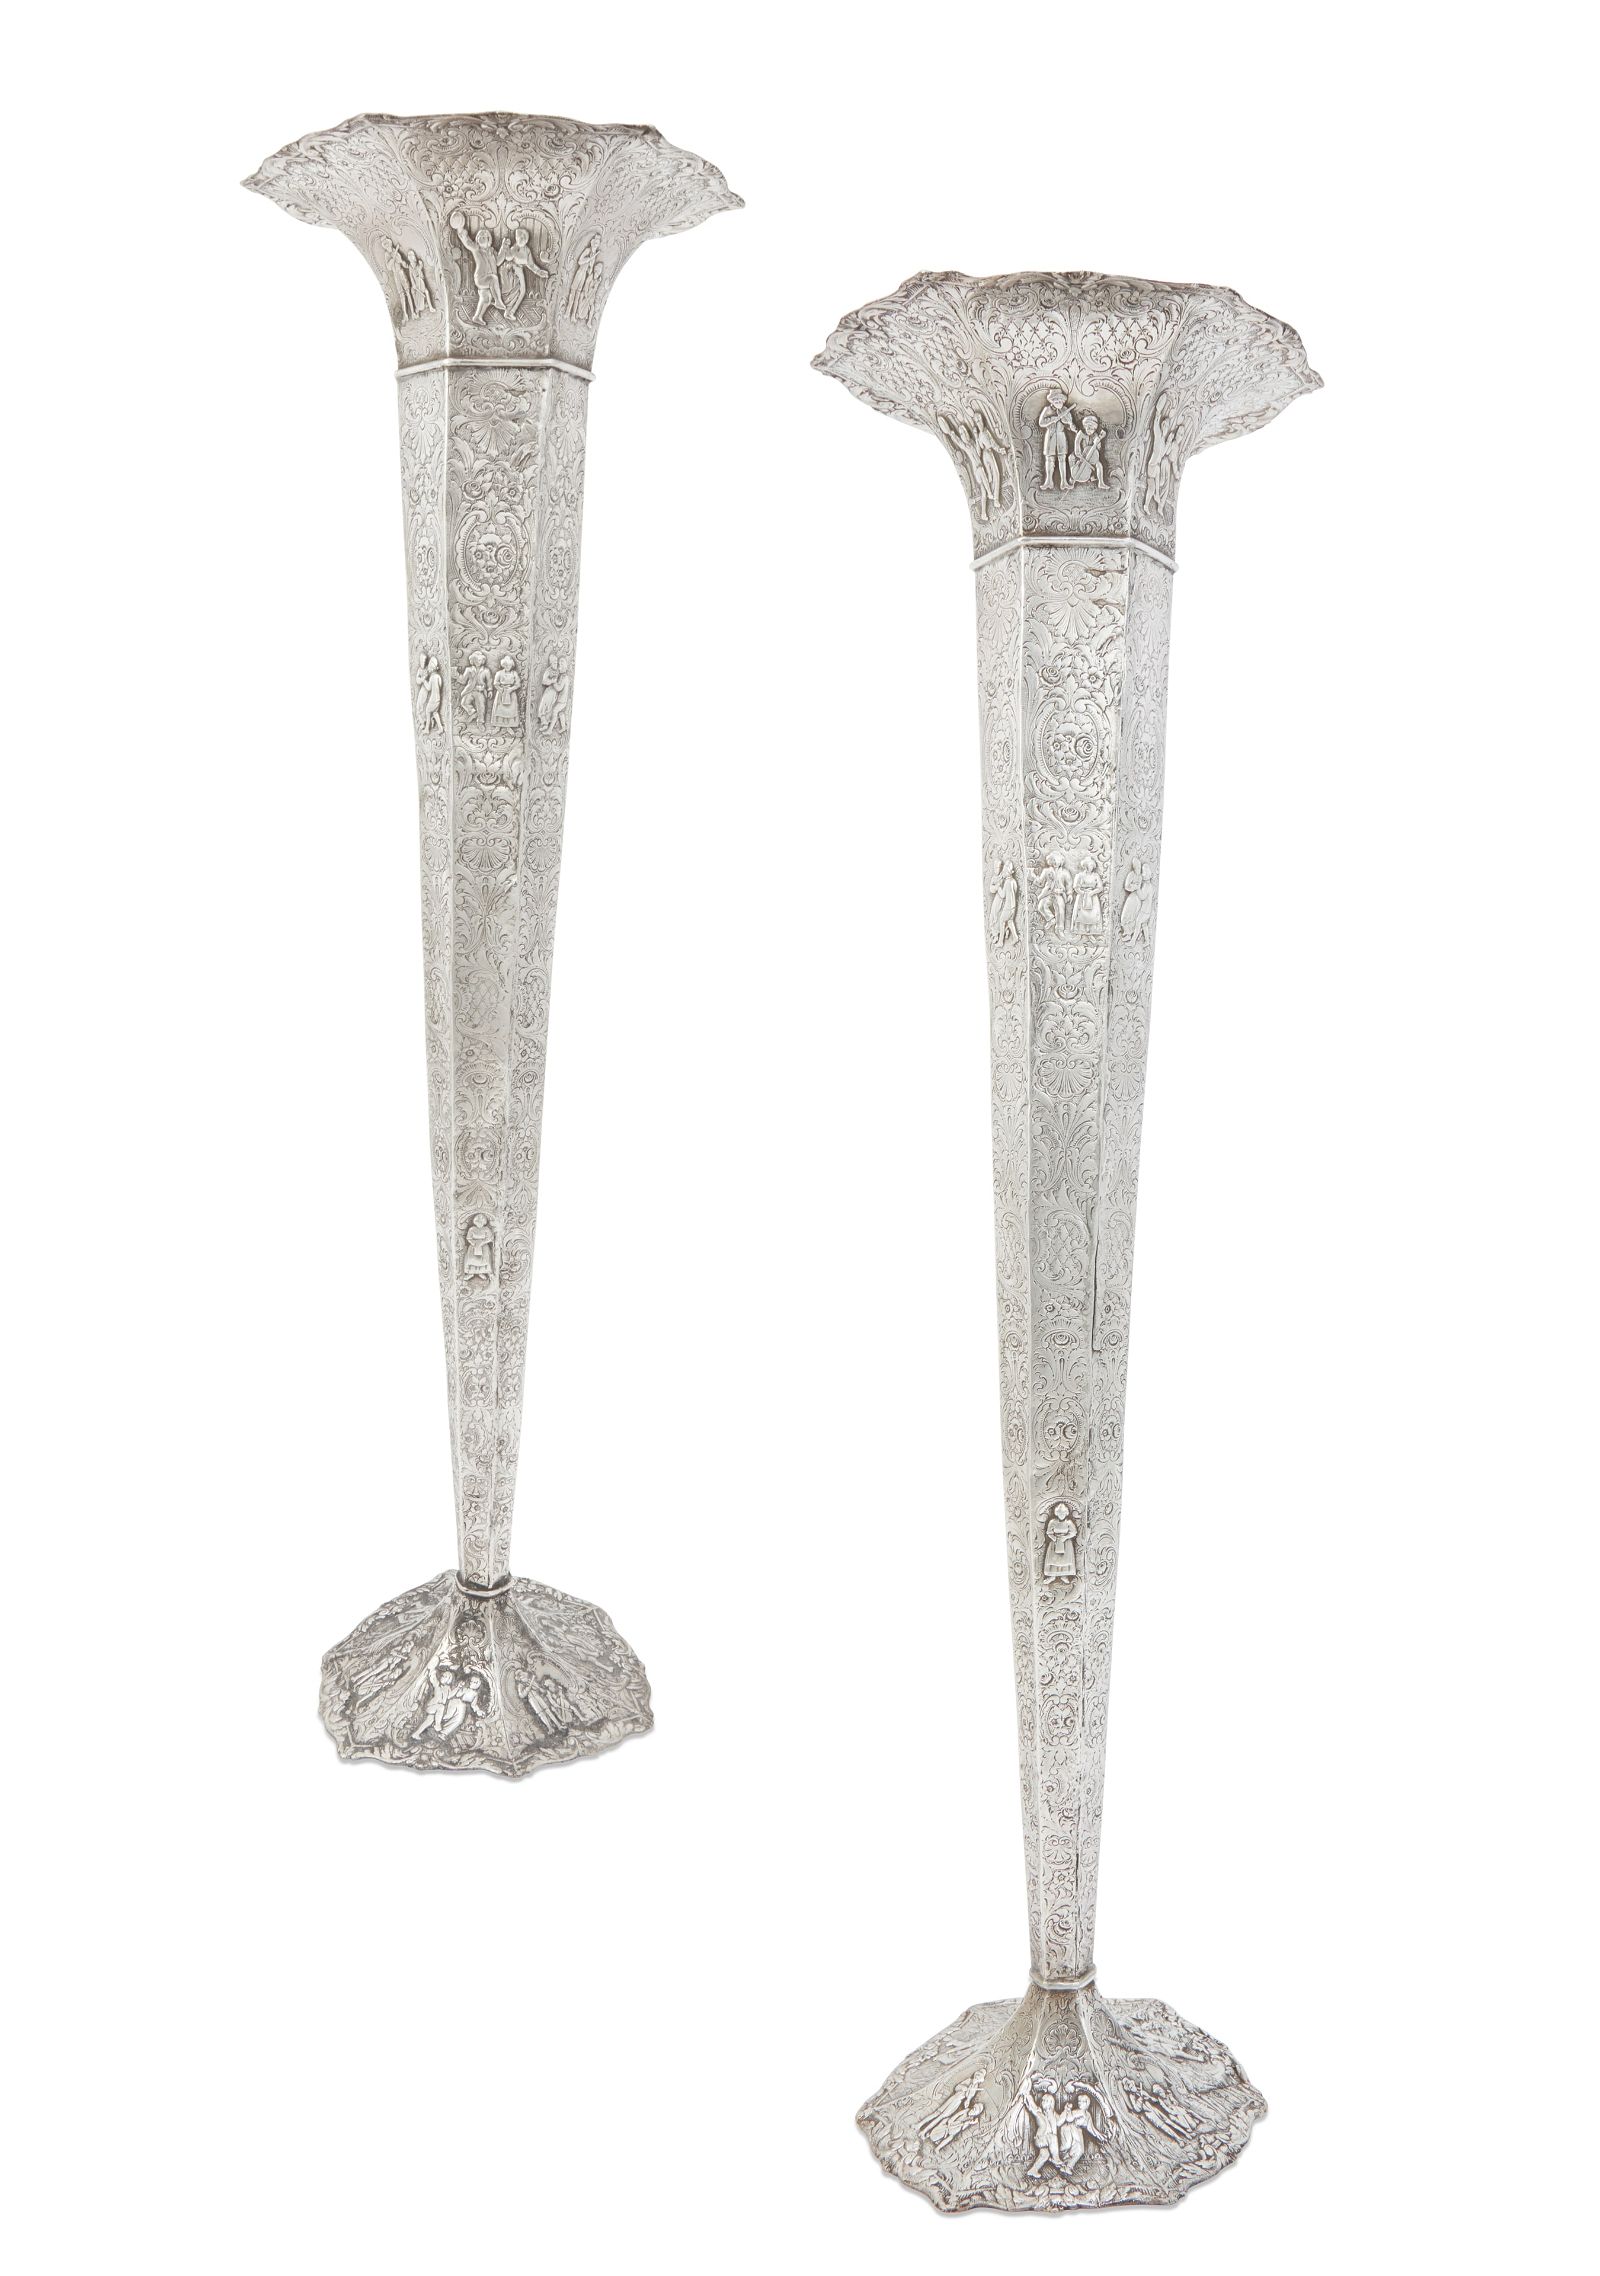 A PAIR OF TALL STERLING SILVER